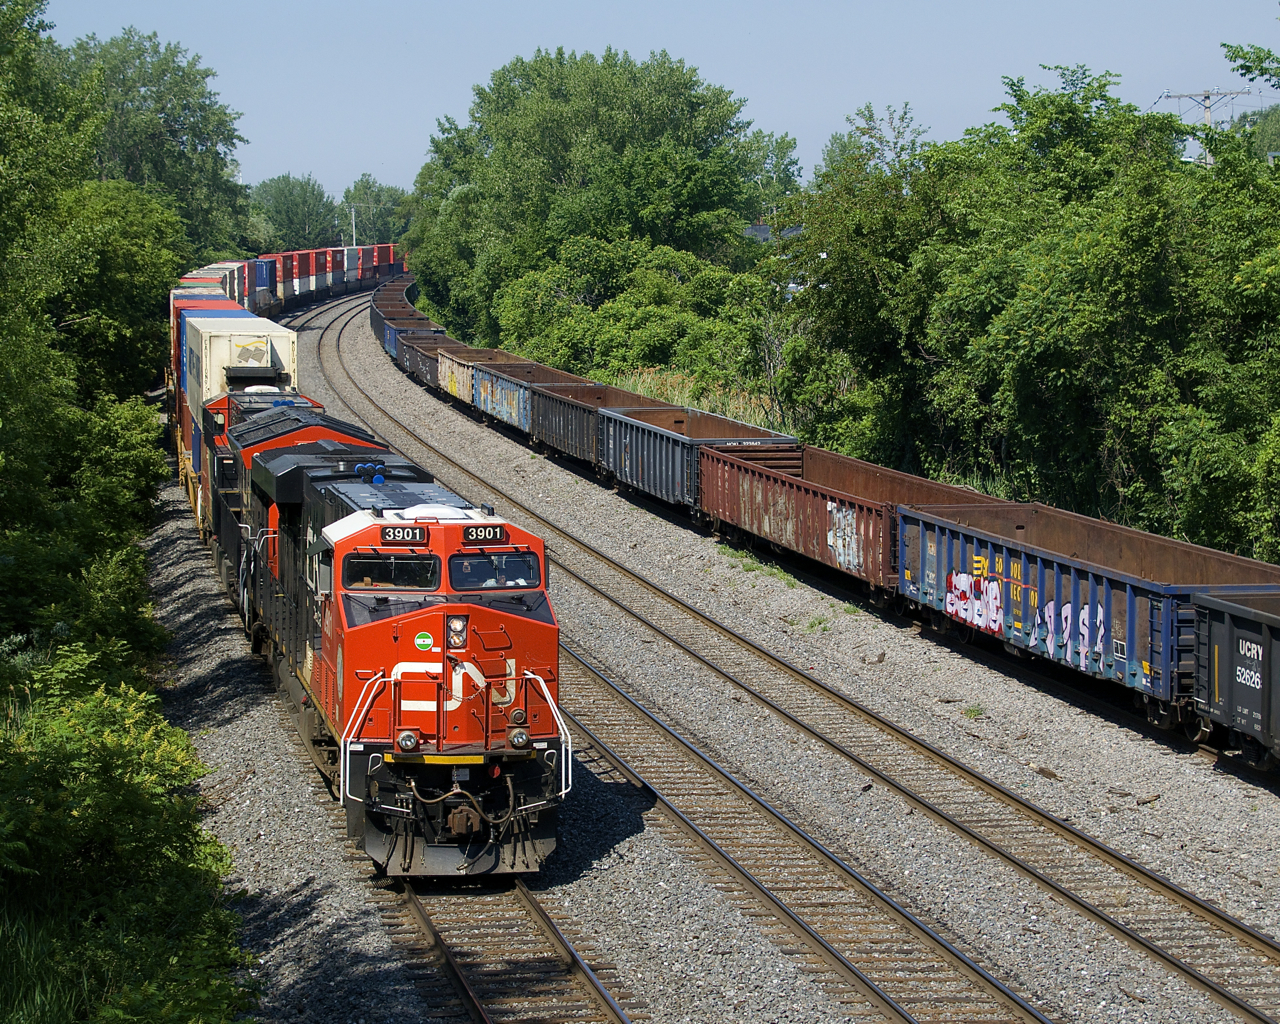 CN 120 has CN 3901 and CN 3142 for power and a 484-axle long train as it passes stored gondolas that are on the transfer track of CN's Montreal Sub. CN 3901 is a tier 4 credit unit that was delivered to CN towards the end of last year.